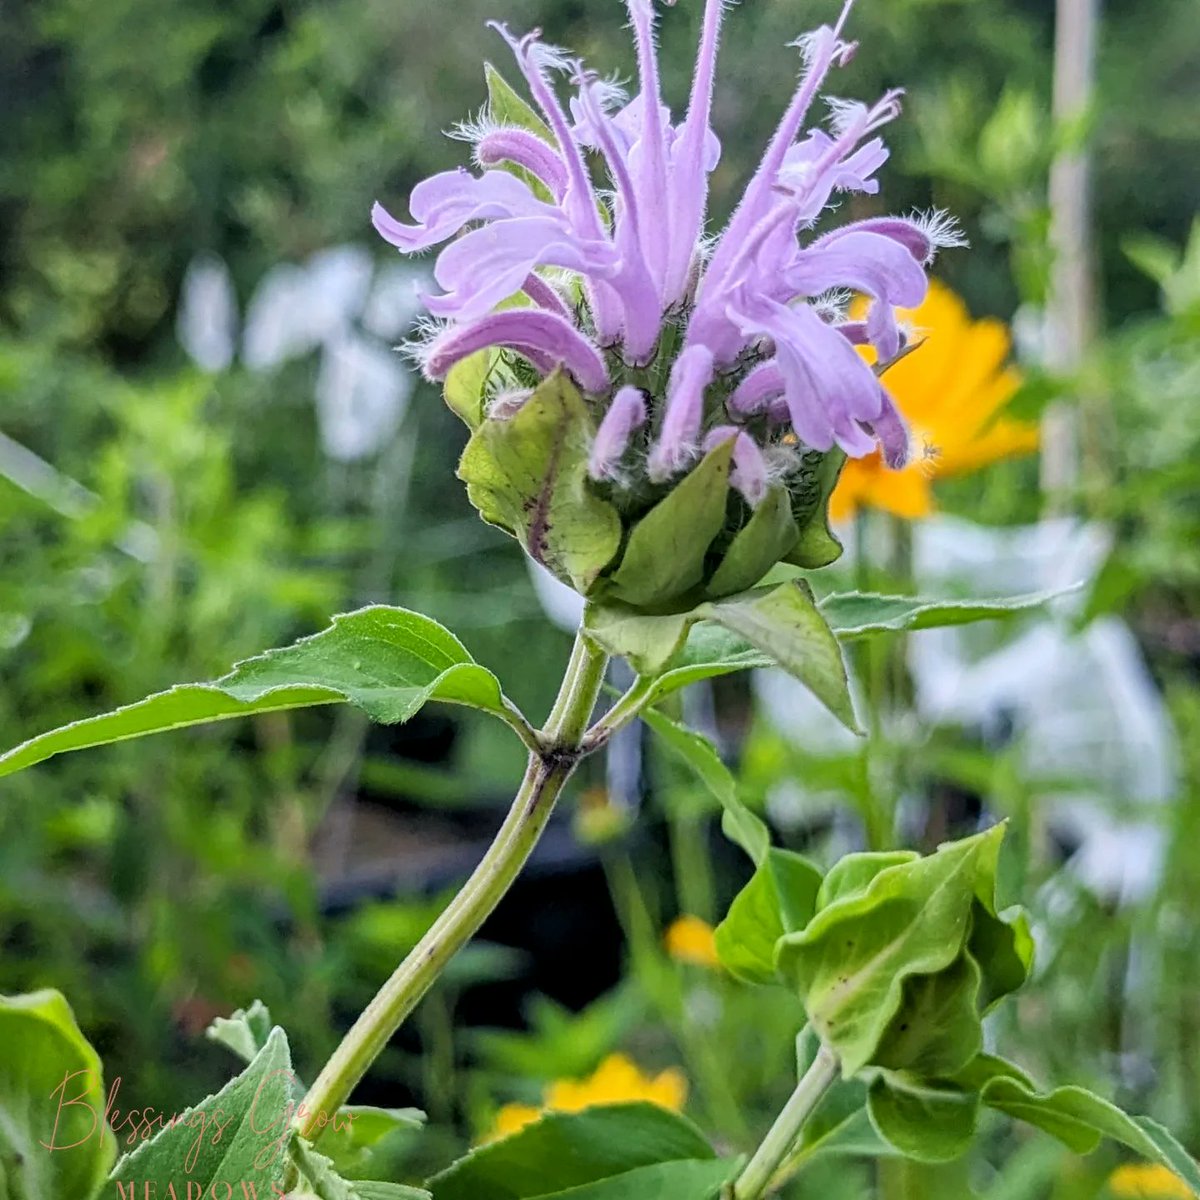 So many new blessings and a couple of surprises!! Seeing longer stems as they get fully established. We are so excited to share! 💐 
.
.
.
.
#BlessingsGrow #flowers #flowerfarm #growingwithpurpose #chemicalfree #beehaven #locallygrown #metterblooms #loveourneighbors